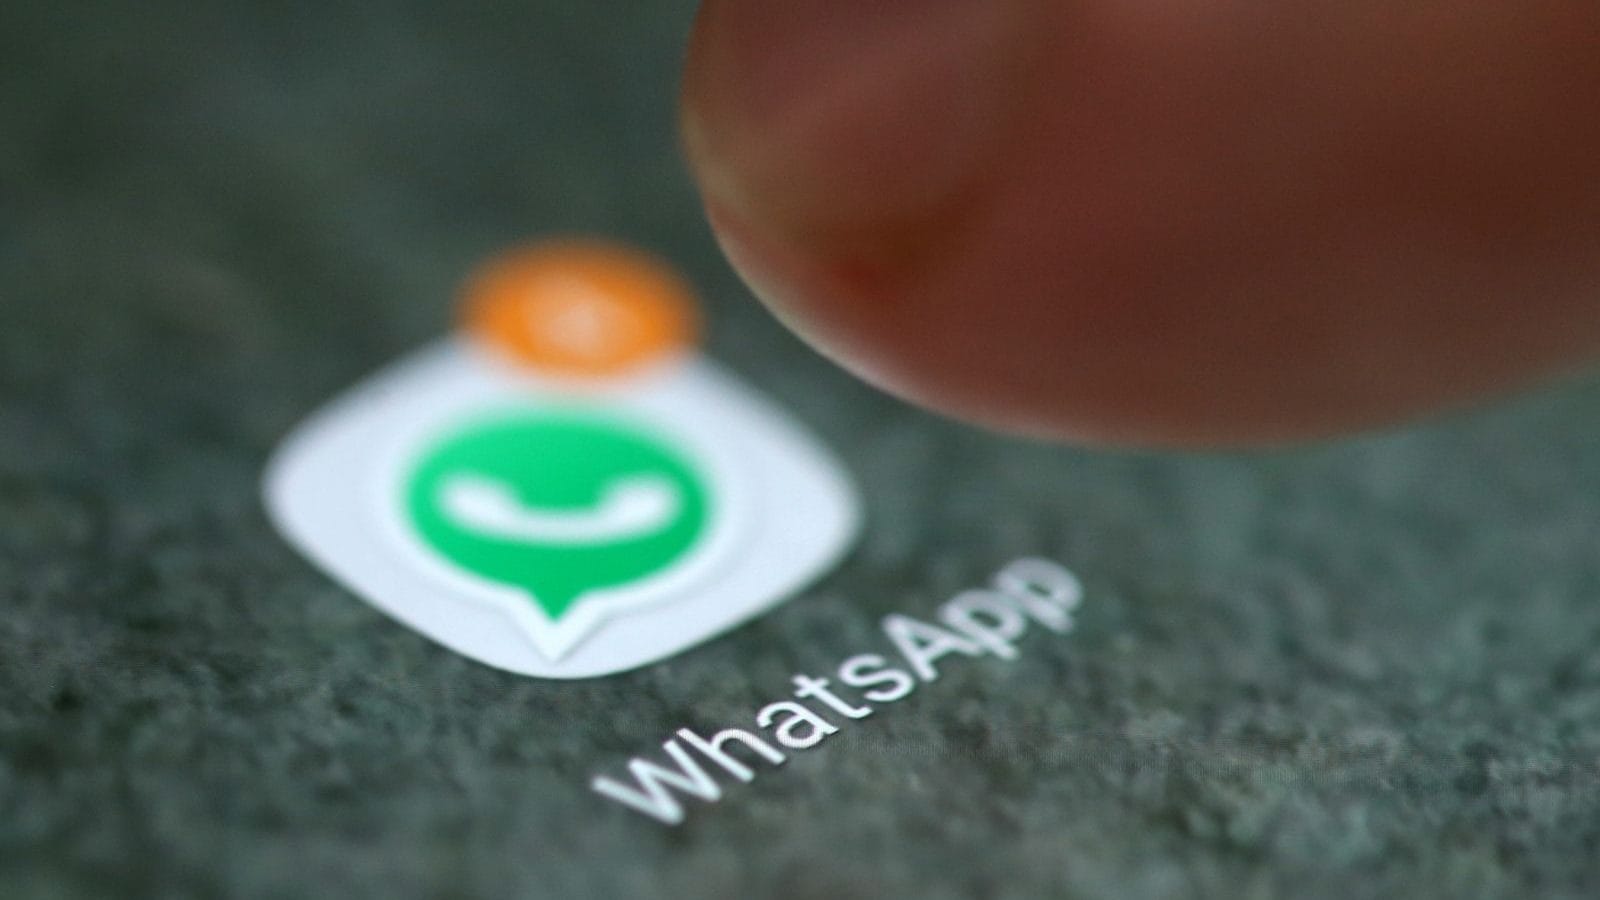 You’ll Soon Be Able To Transfer WhatsApp Chats From All Android Phone To A New iPhone